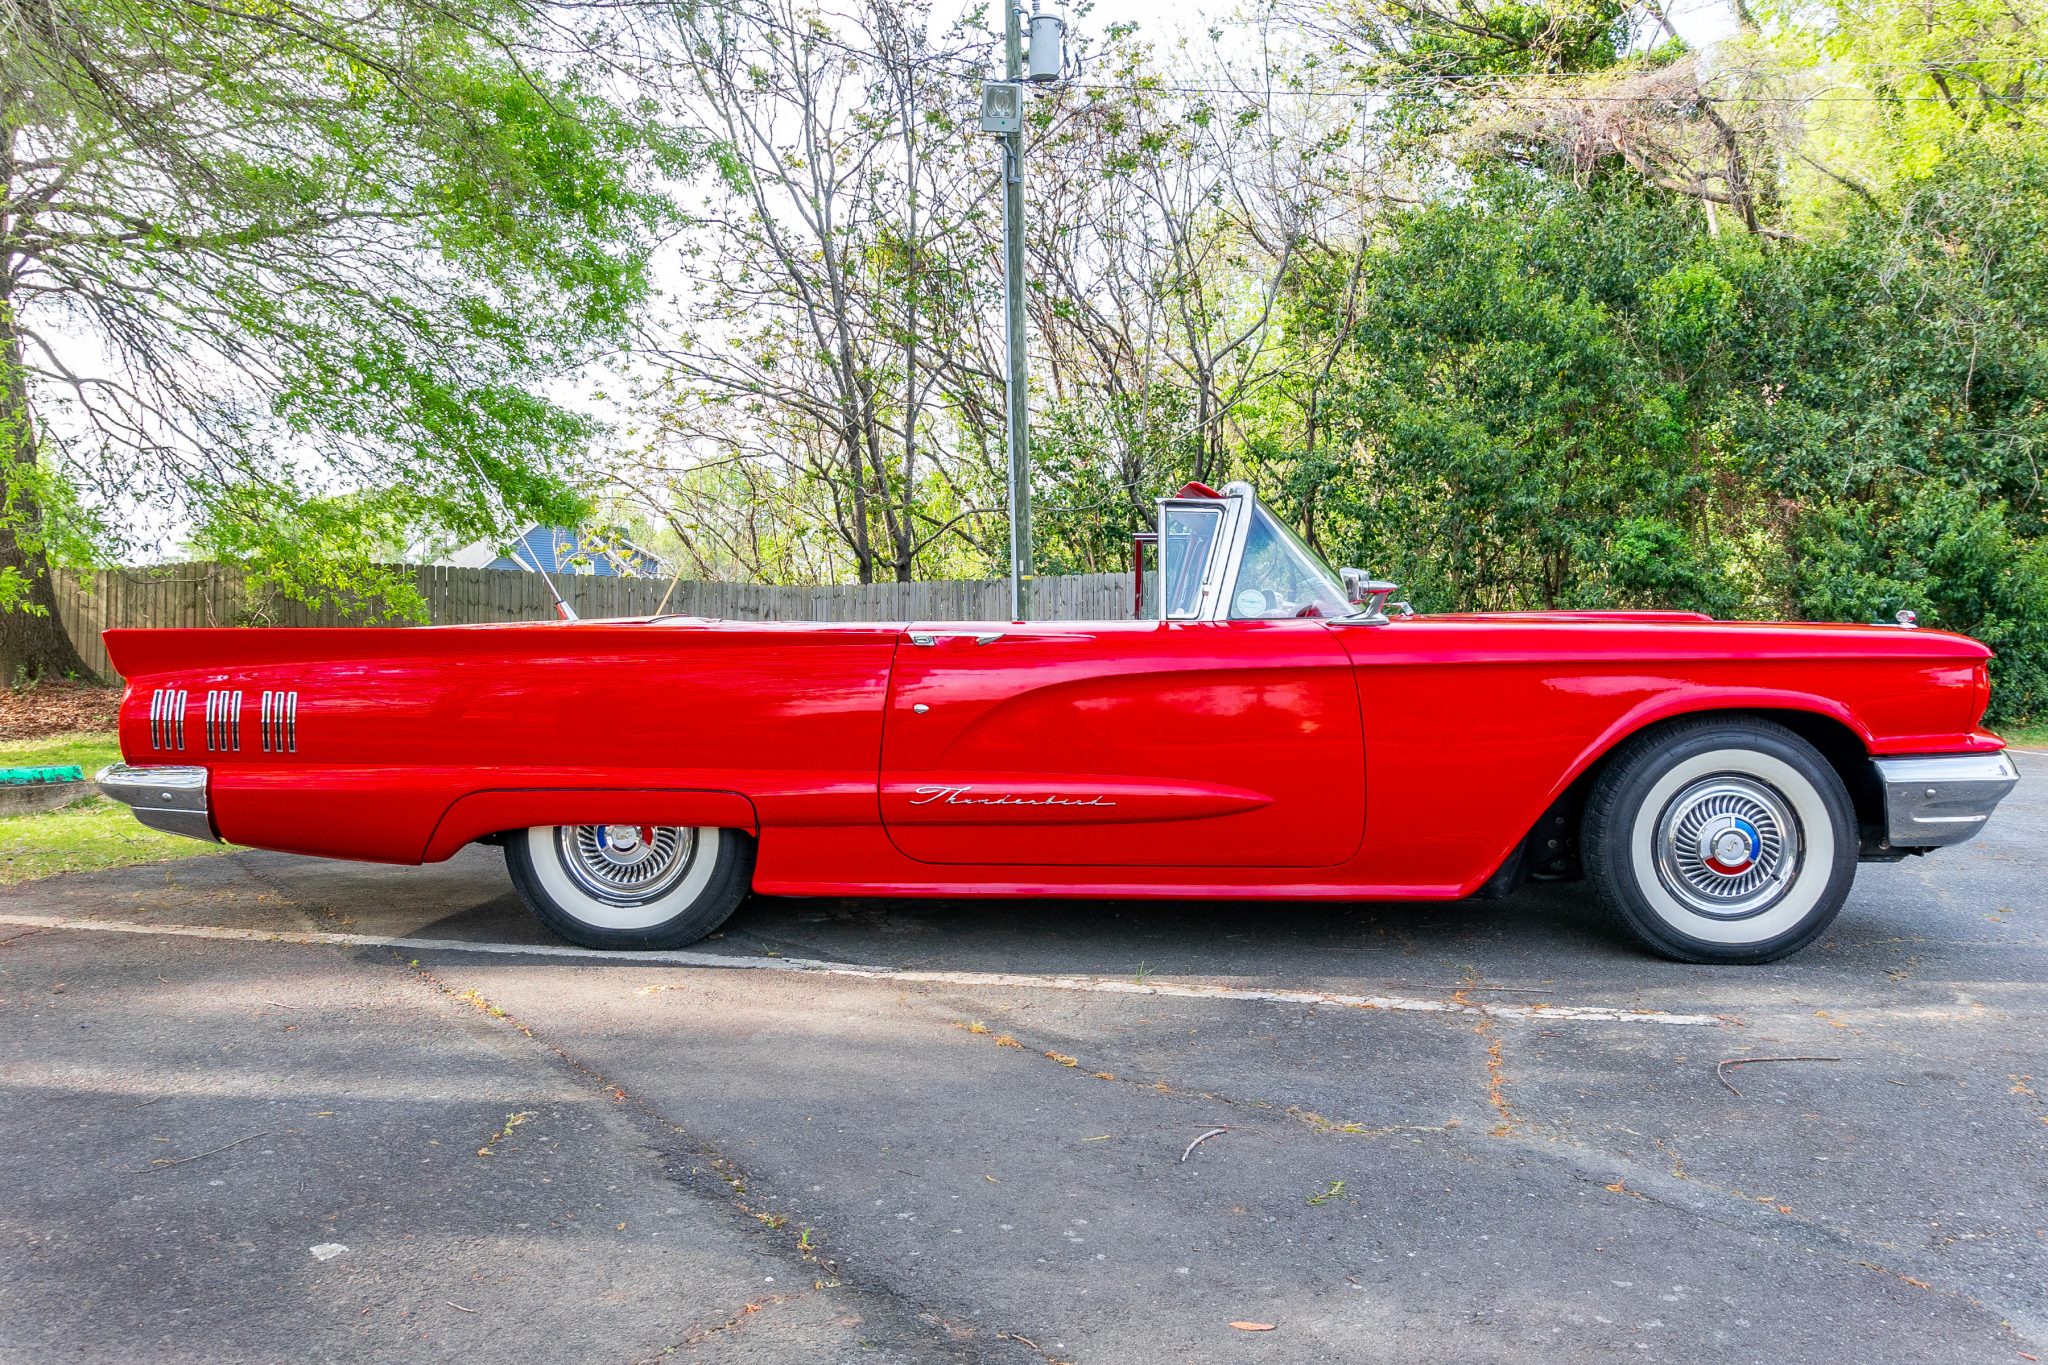 1960 Ford Thunderbird once owned by Barry Gibb of the Bee Gees